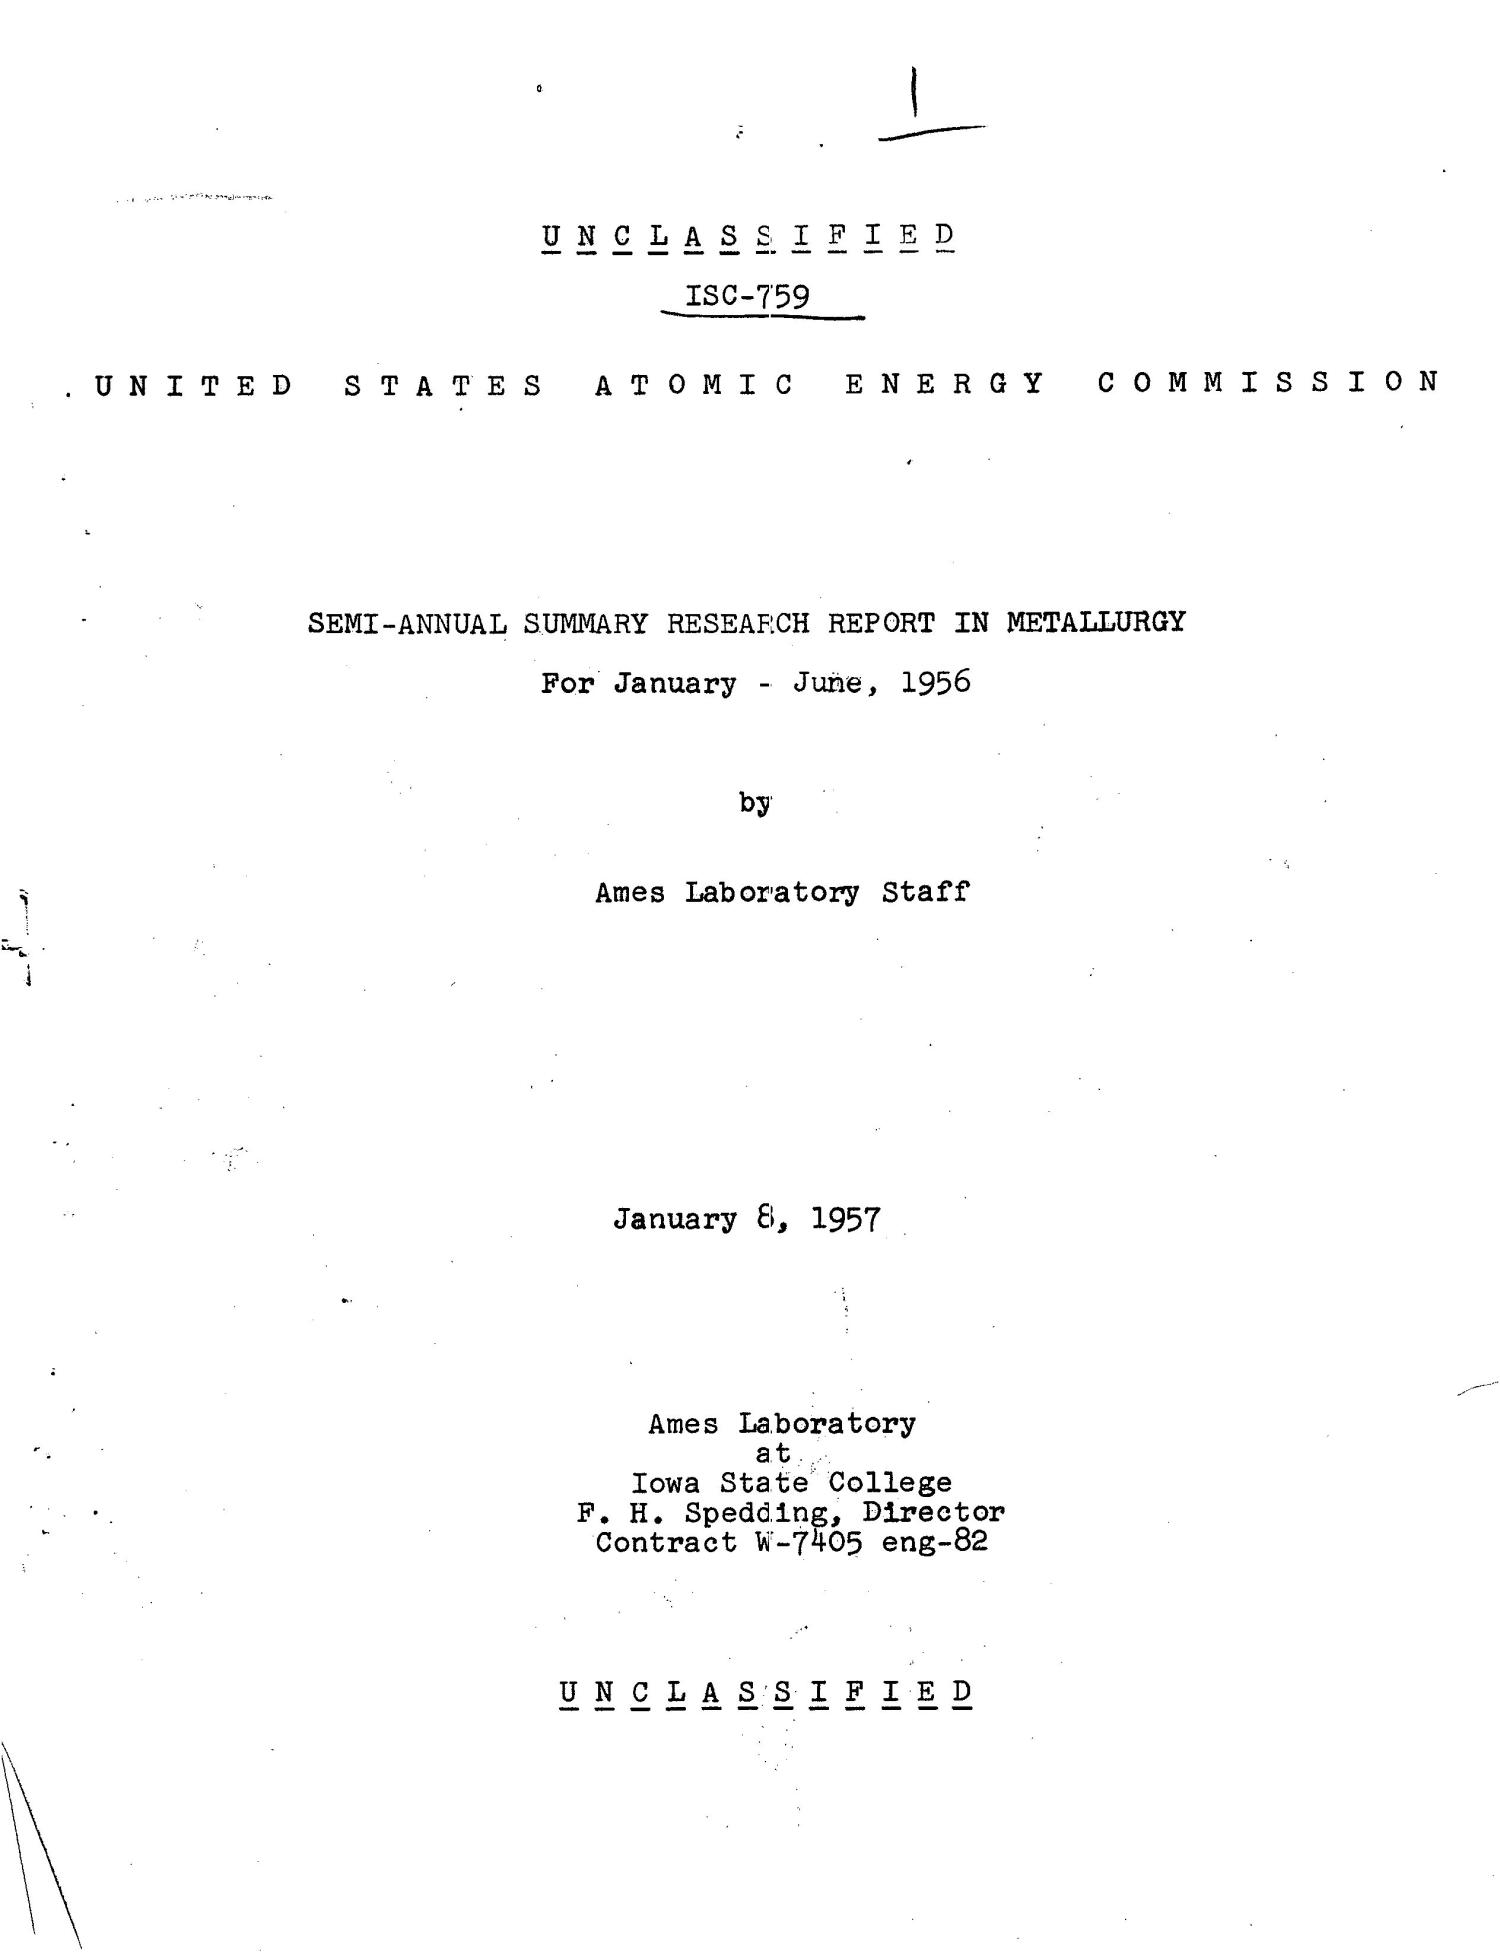 Semi-Annual Summary Research Report in Metallurgy for January-June 1956
                                                
                                                    [Sequence #]: 1 of 44
                                                